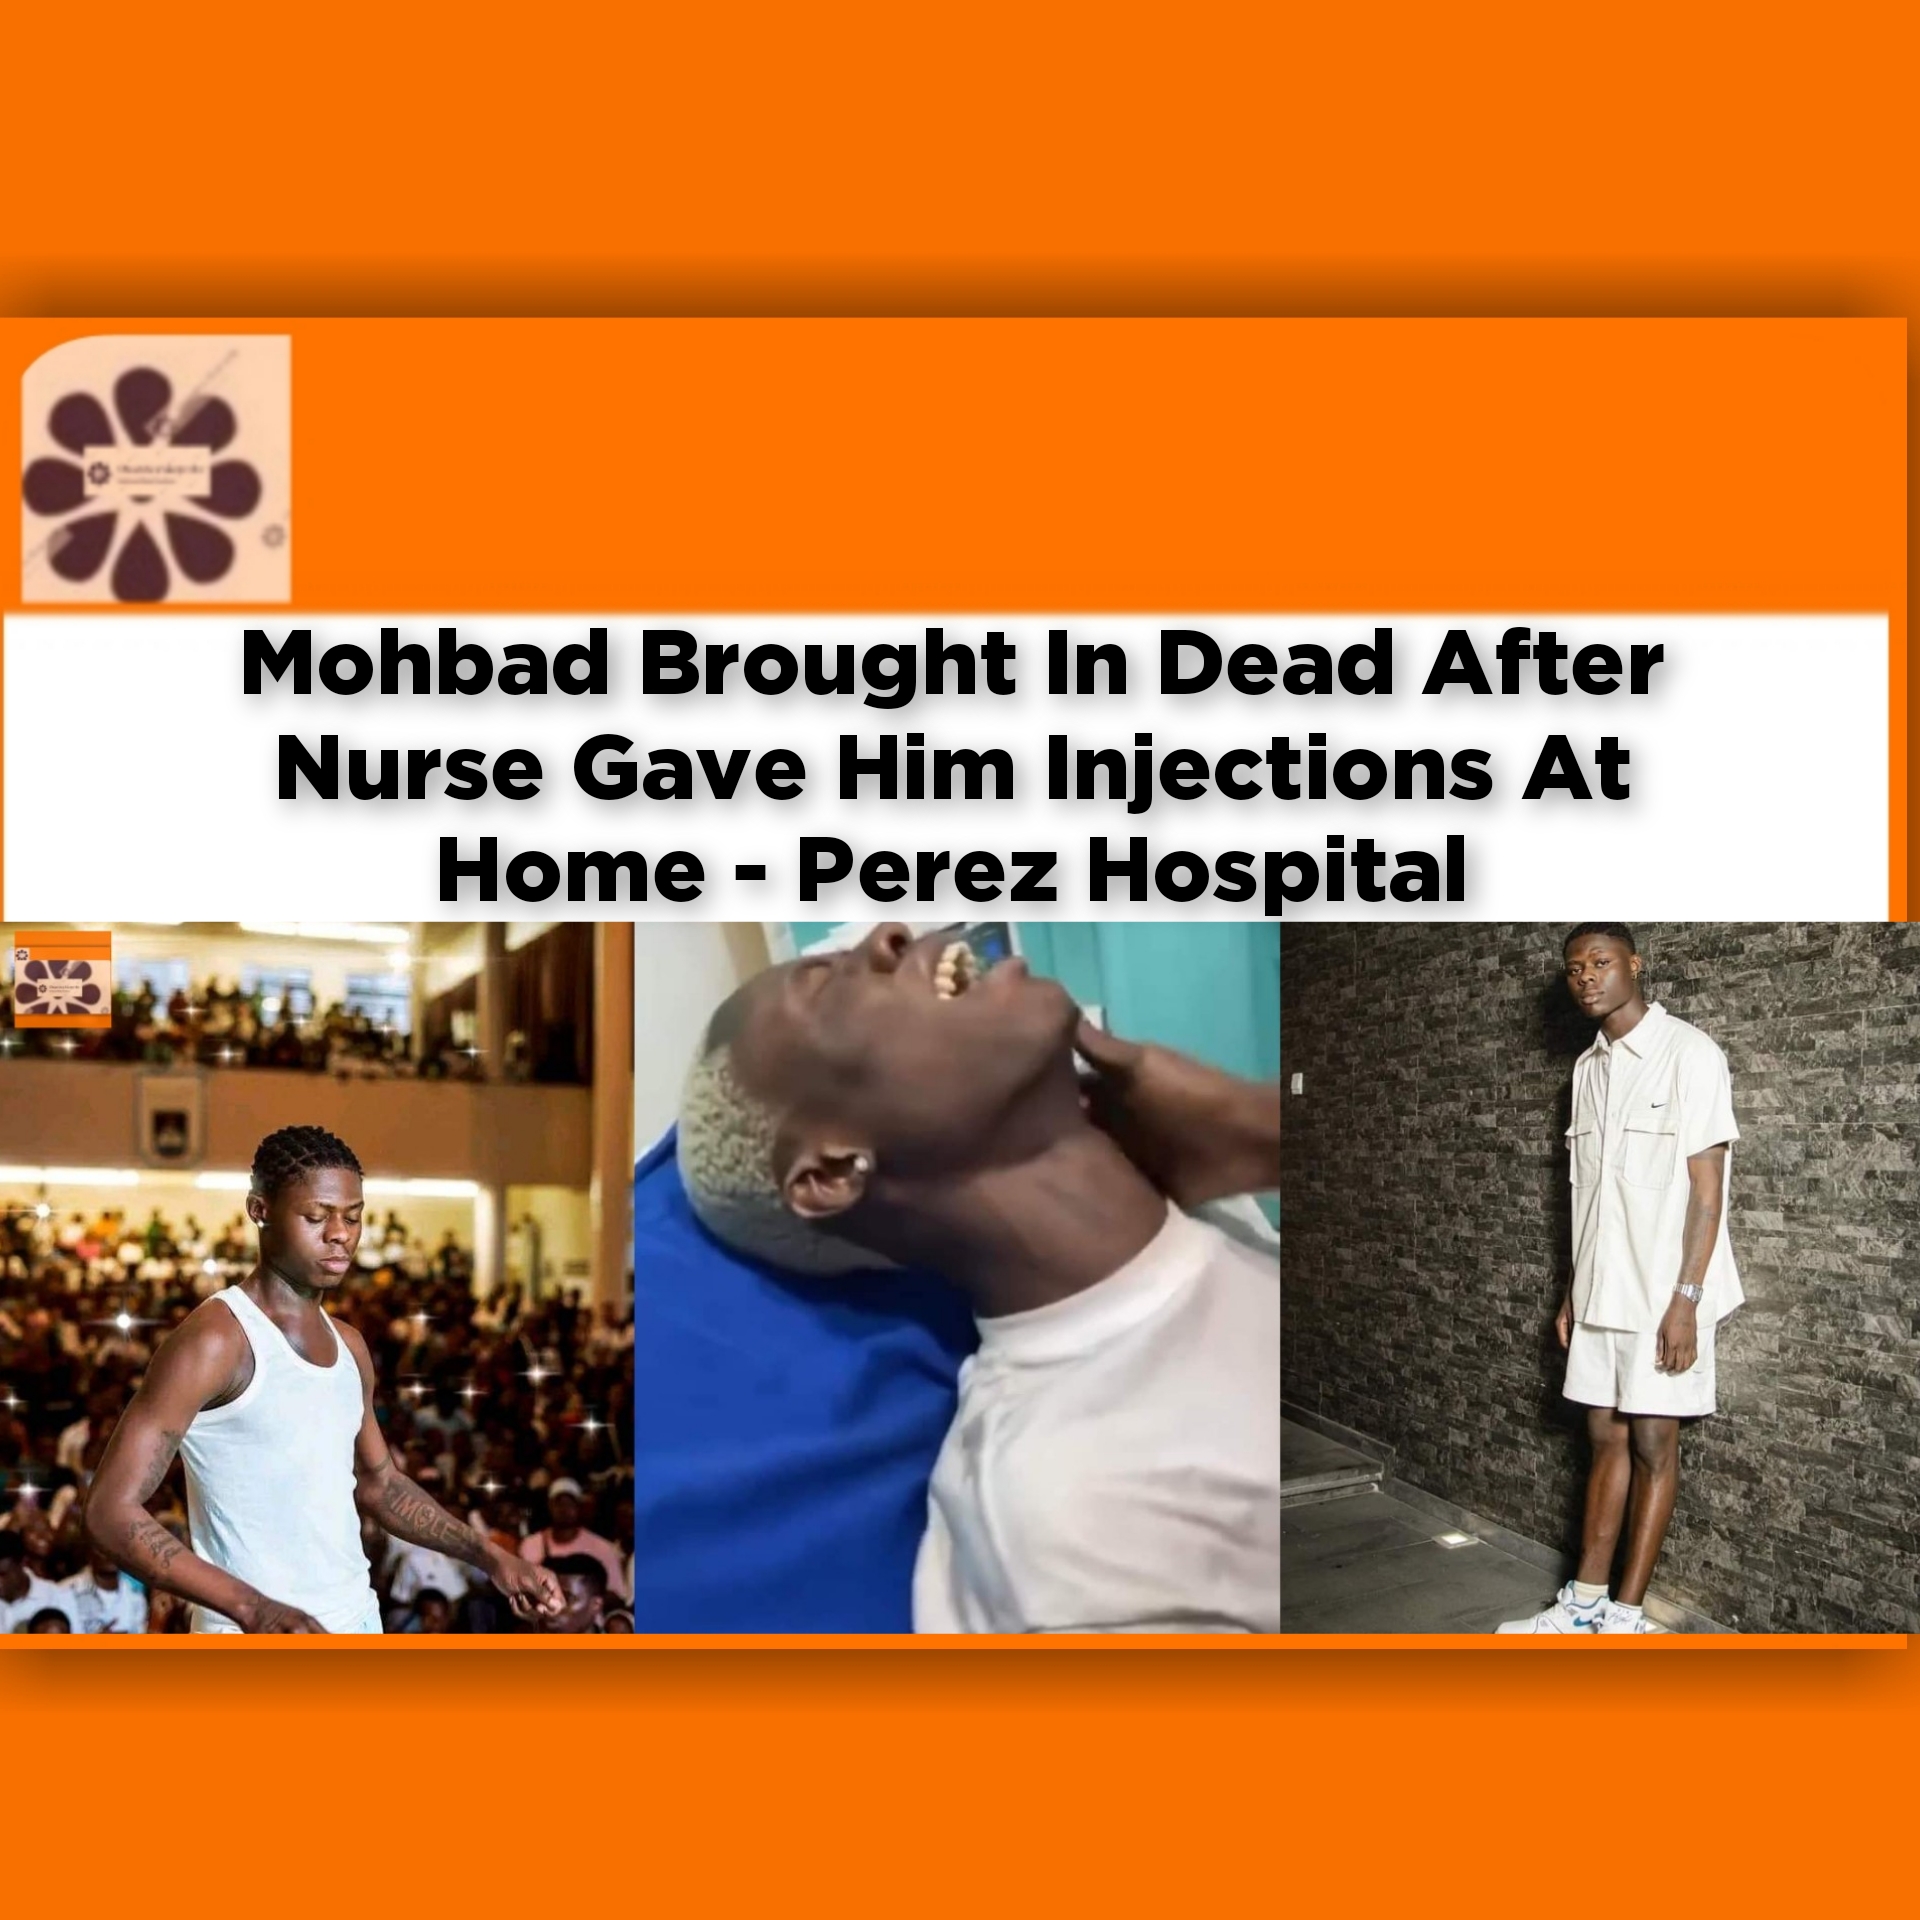 Mohbad Brought In Dead After Nurse Gave Him Injections At Home - Perez Hospital ~ OsazuwaAkonedo #Lagos #Mohbad #Perez